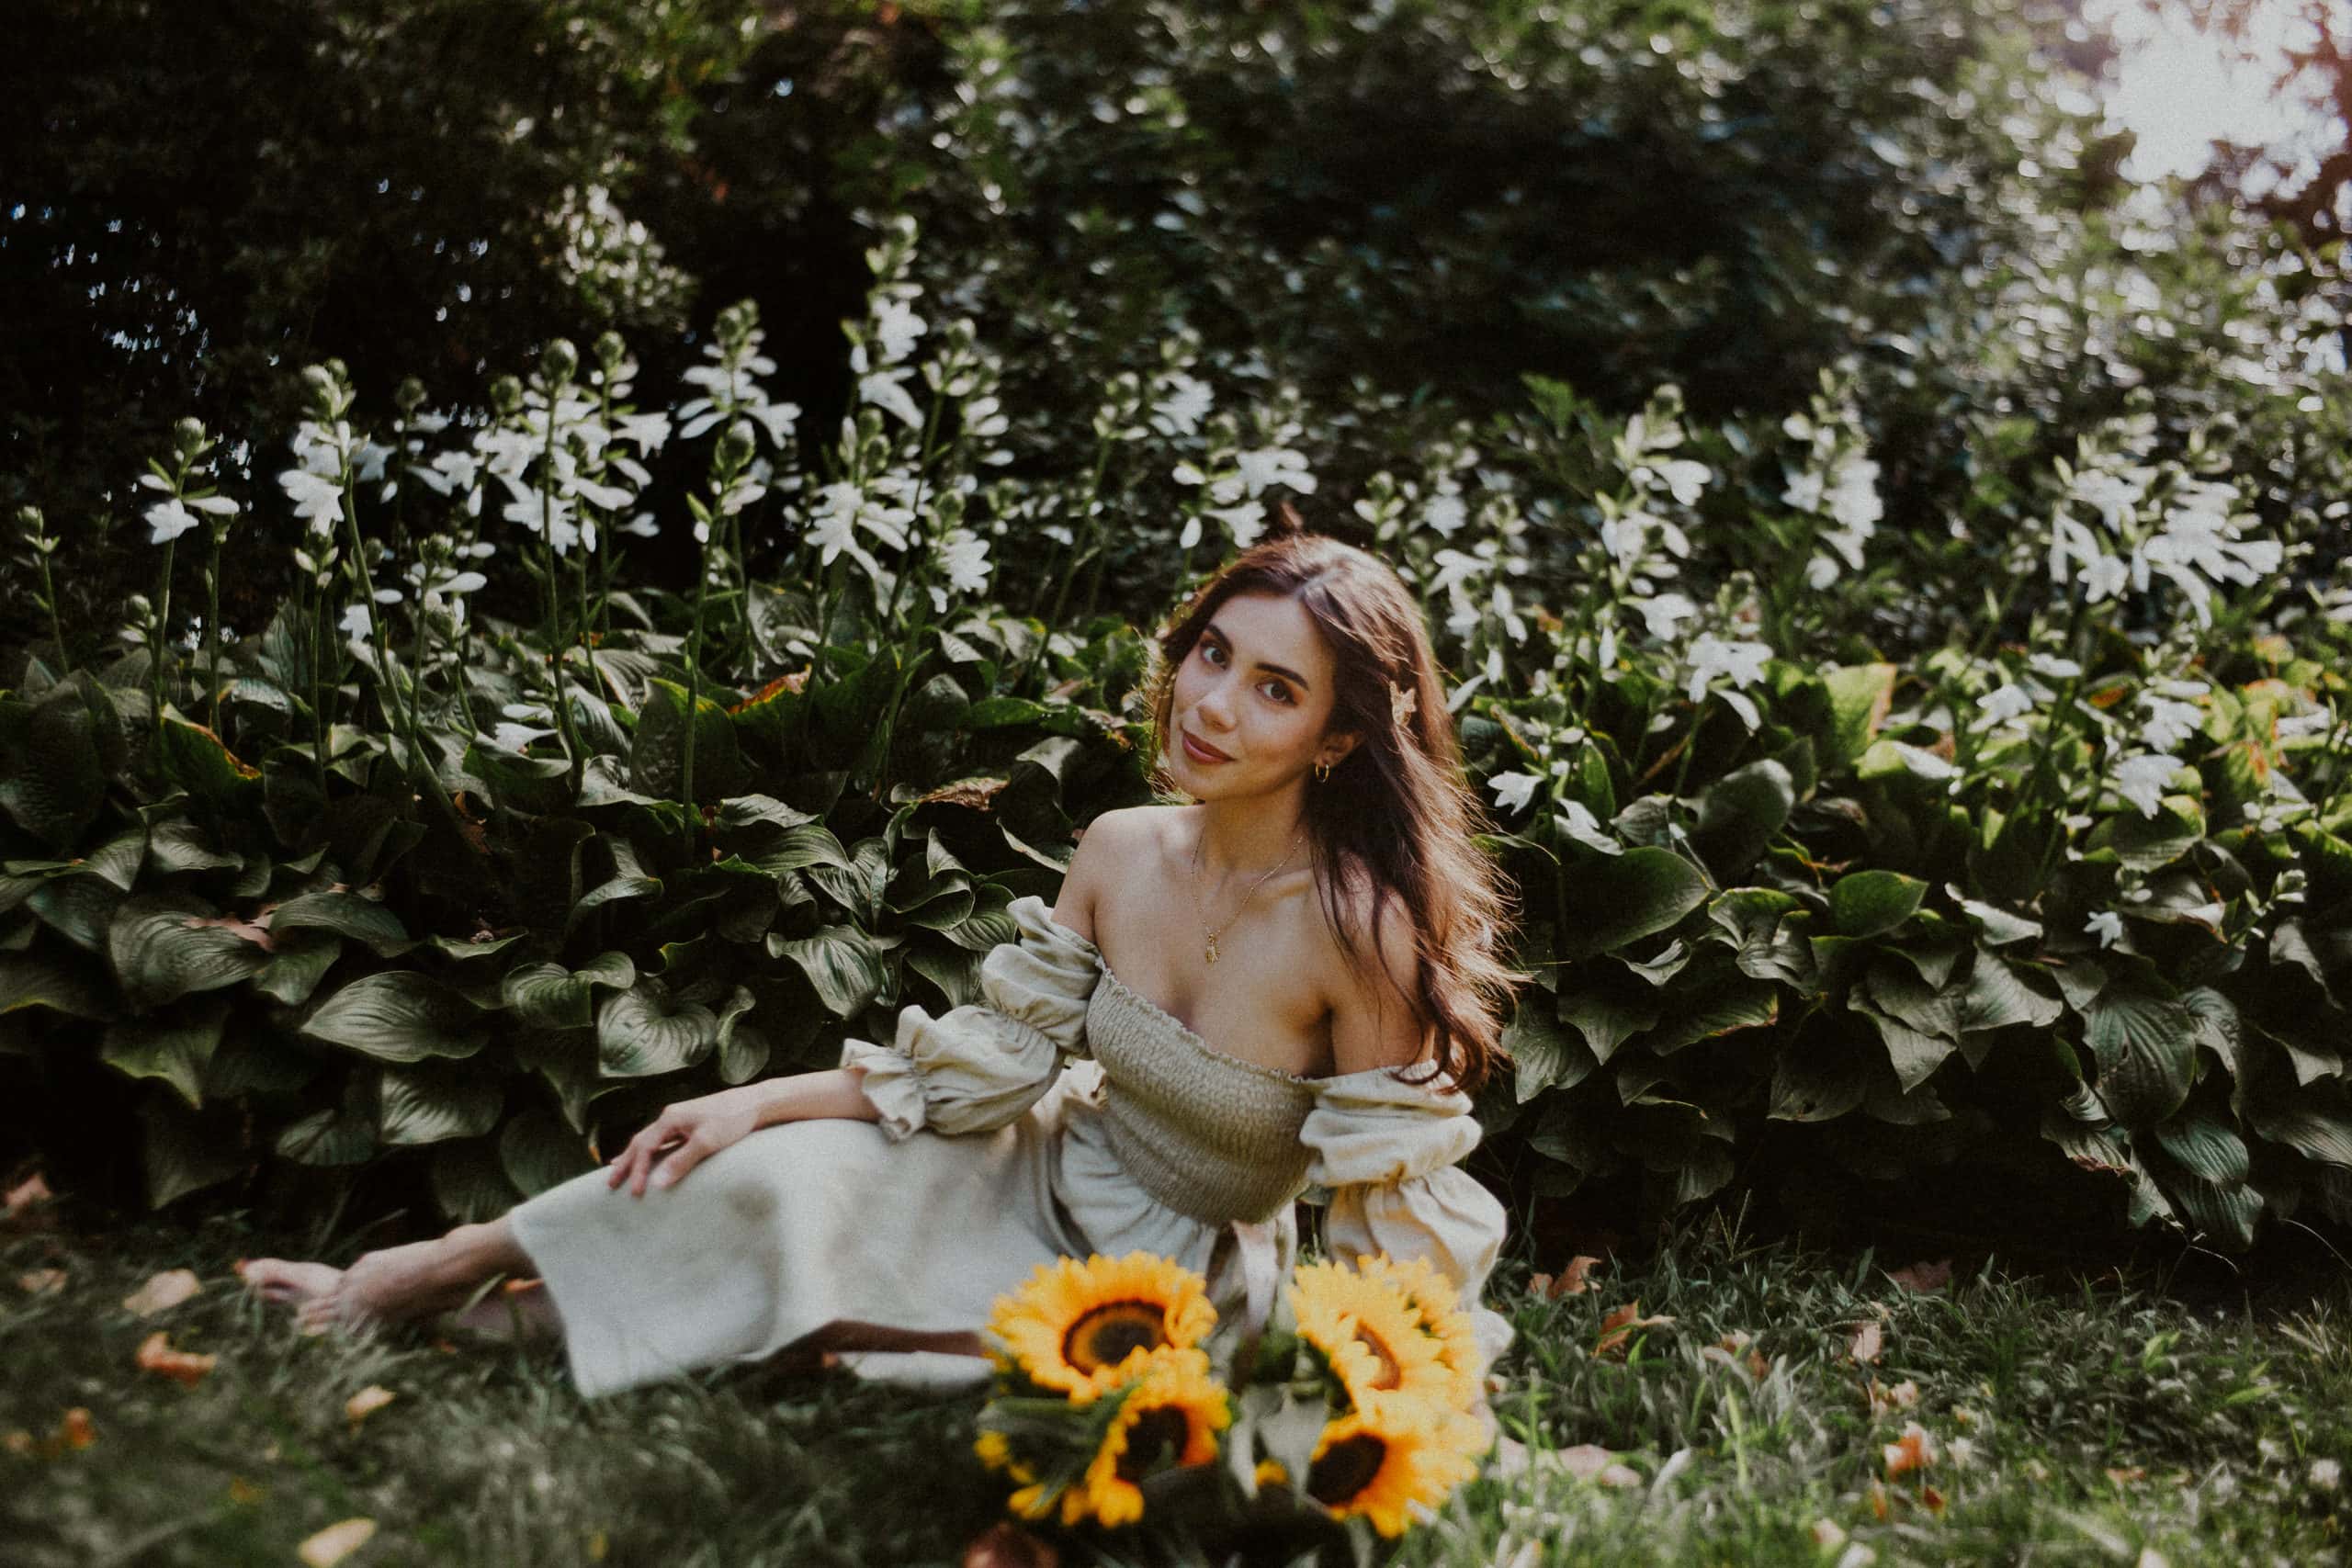 Portrait Photographer, a woman in dress sits in the grass before a lush foilage